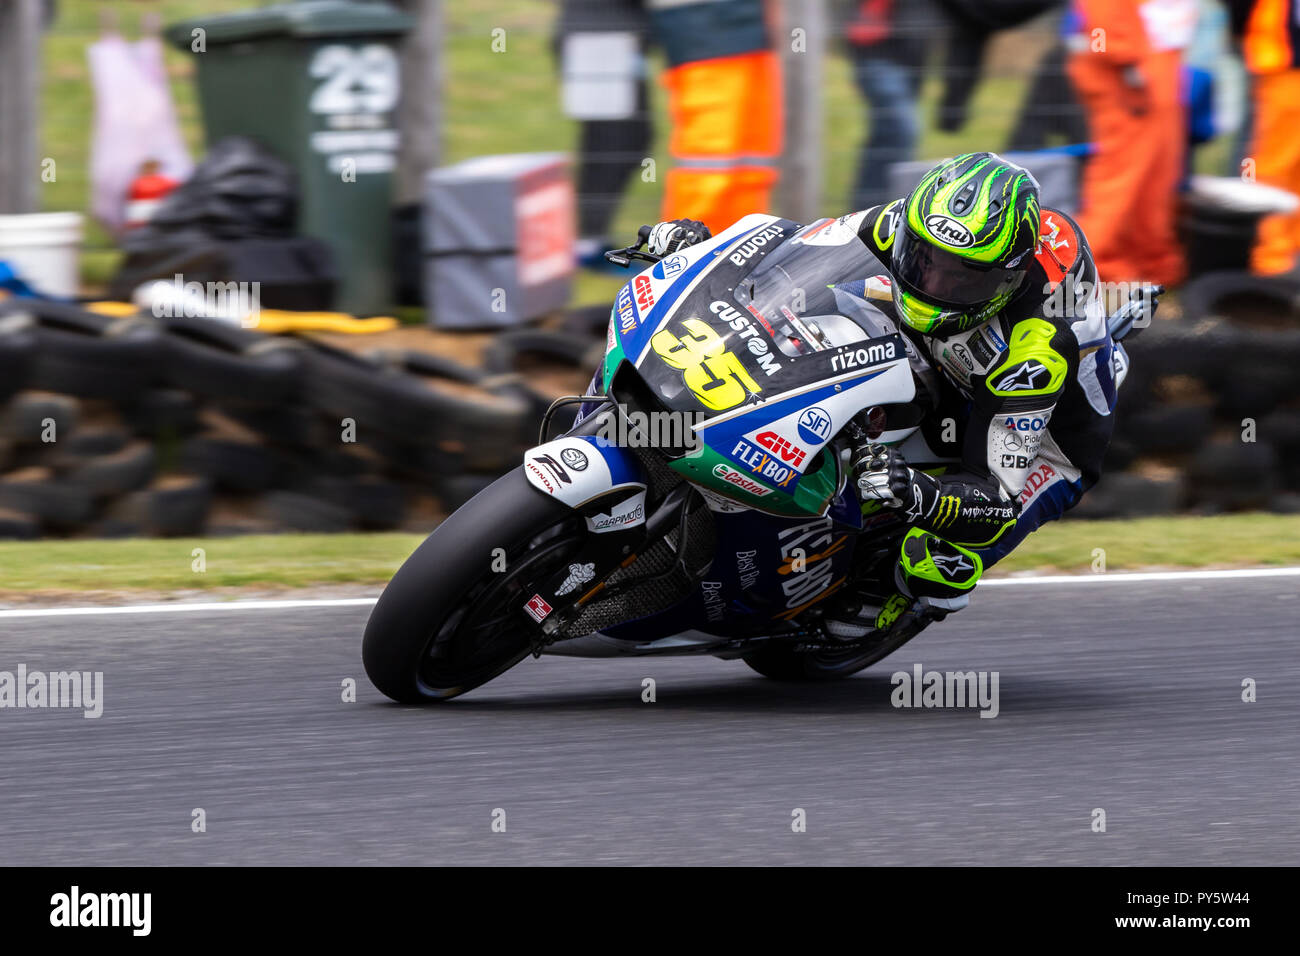 Melbourne, Australia. 26th October, 2018. Cal Crutchlow (GBR) riding the #35 LCR Honda Castrol during the 2018 Michelin Australian Motorcycle Grand Prix , Australia on October 26 2018. Credit: Dave Hewison Sports/Alamy Live News Stock Photo